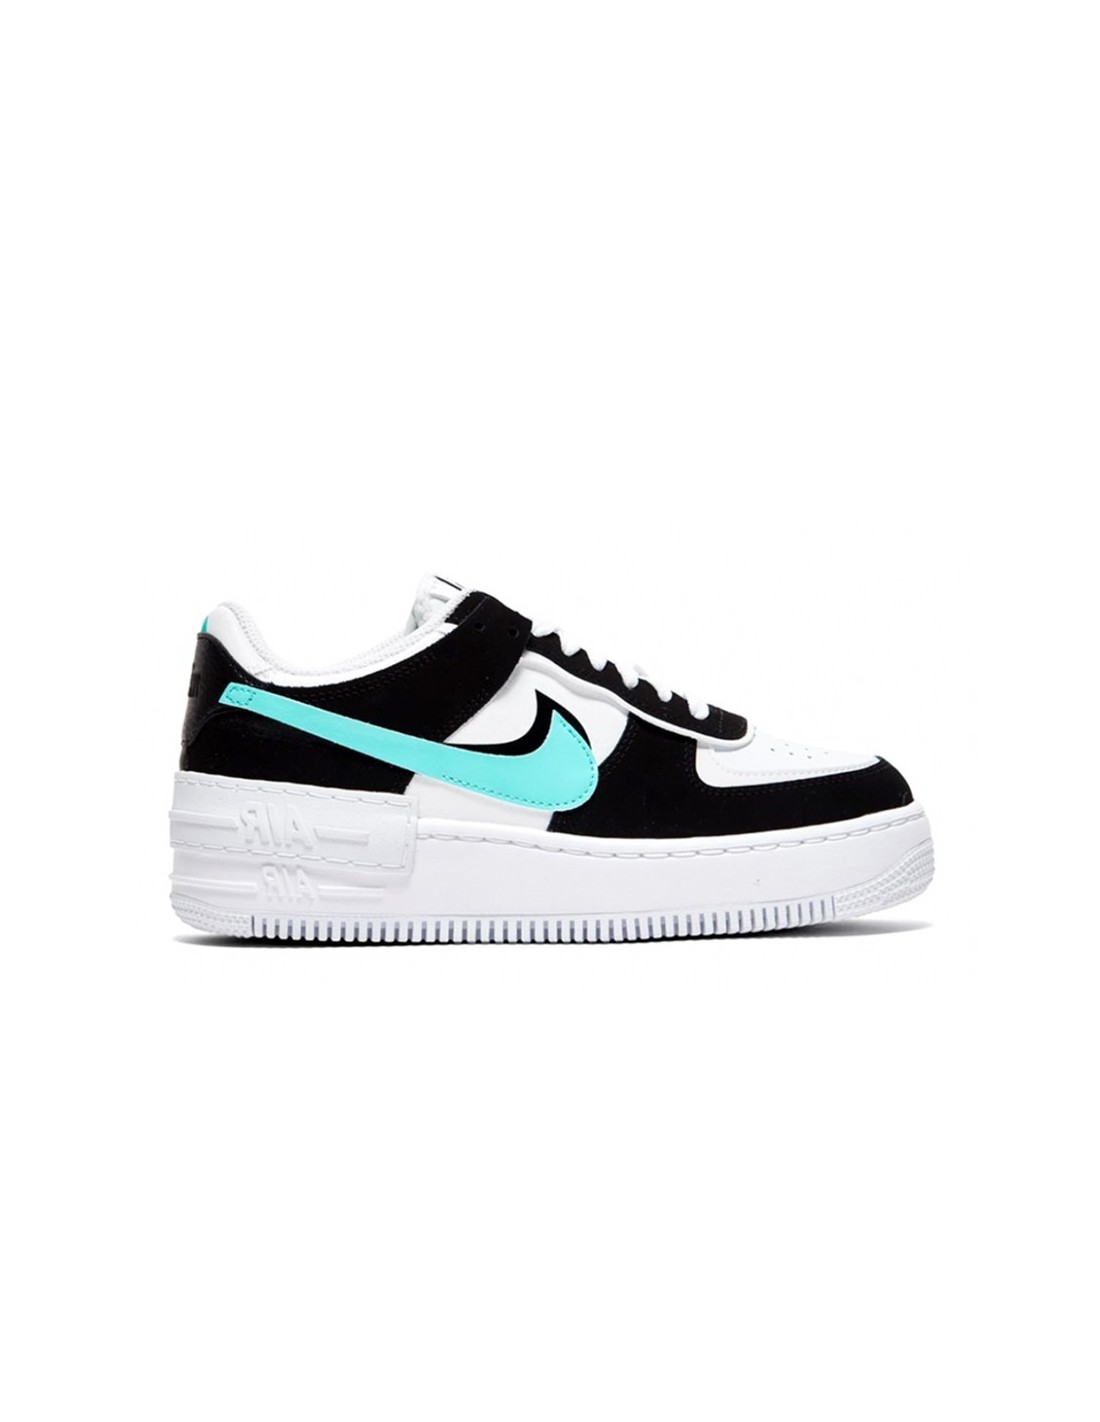 Nike Air Force One SHADOW Negras y